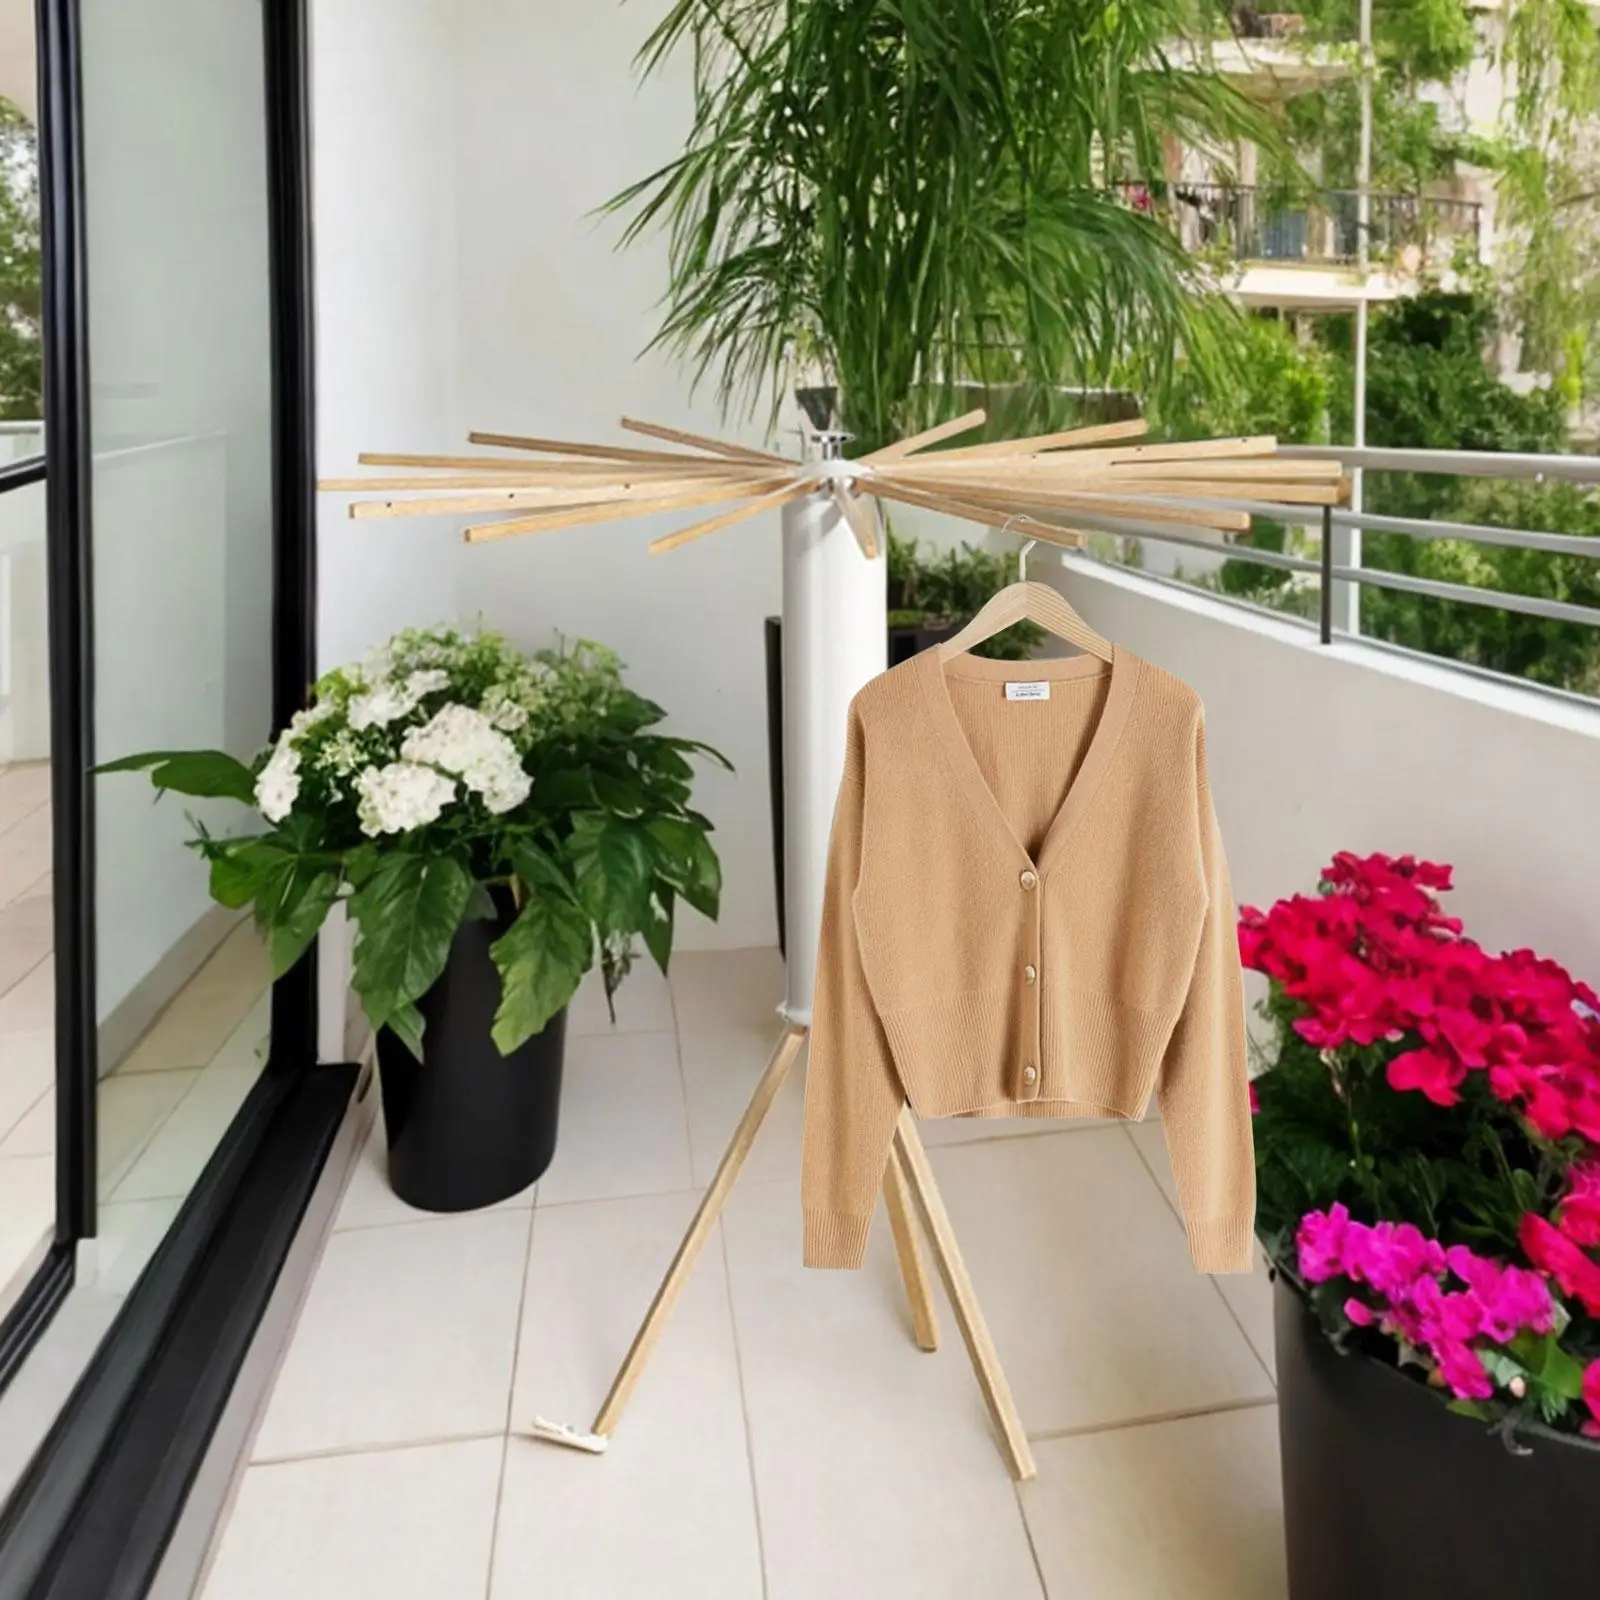 Tripod Clothes Drying Rack Folding Coat Hanger for Indoor Outdoor Travel